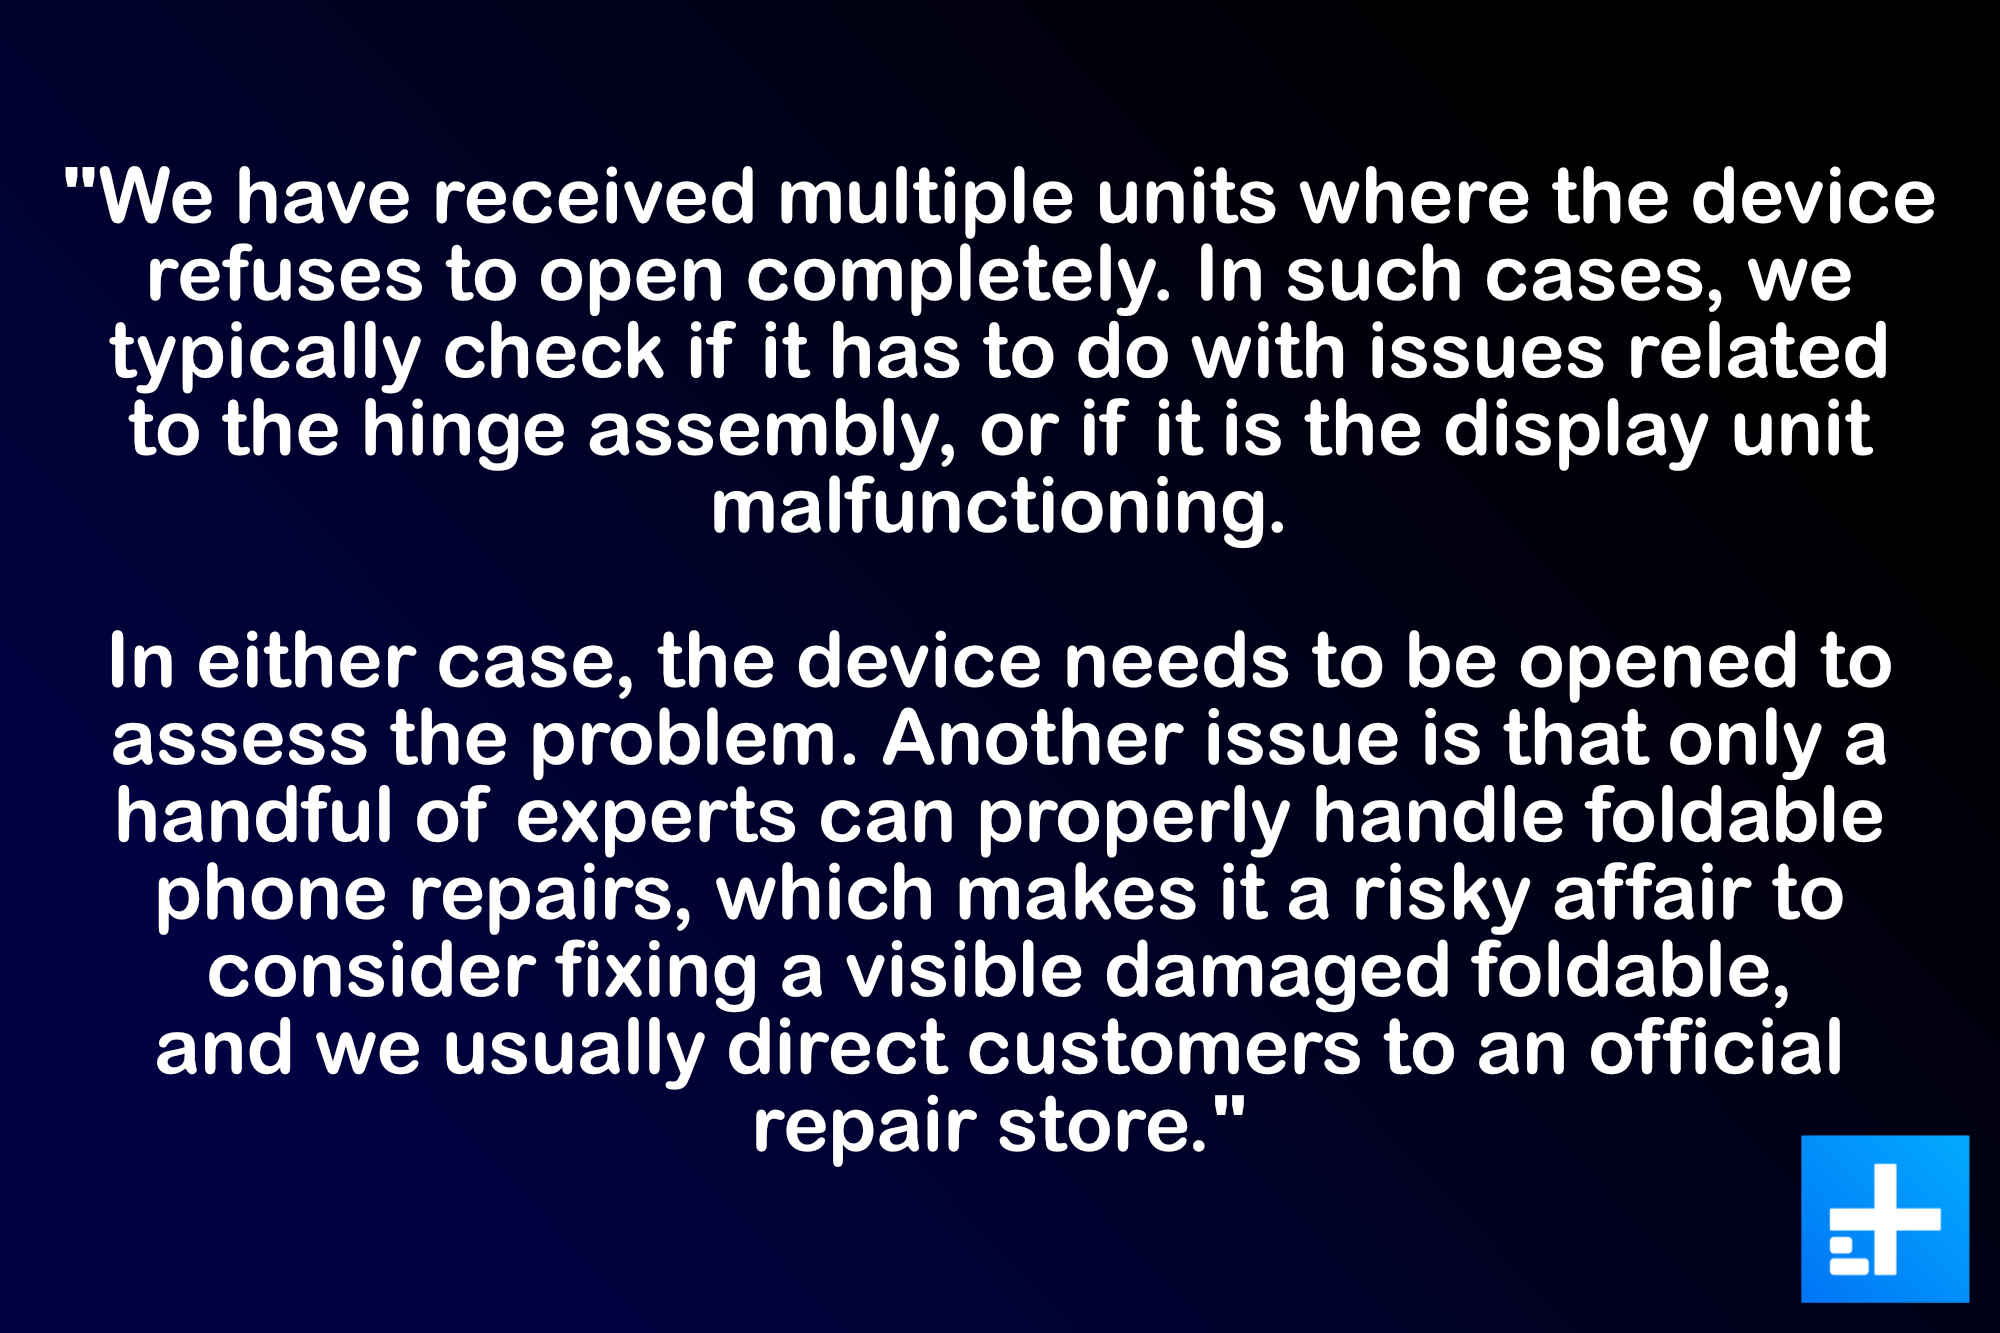 Comment about Samsung foldable phones from an expert at an authorized service outlet.